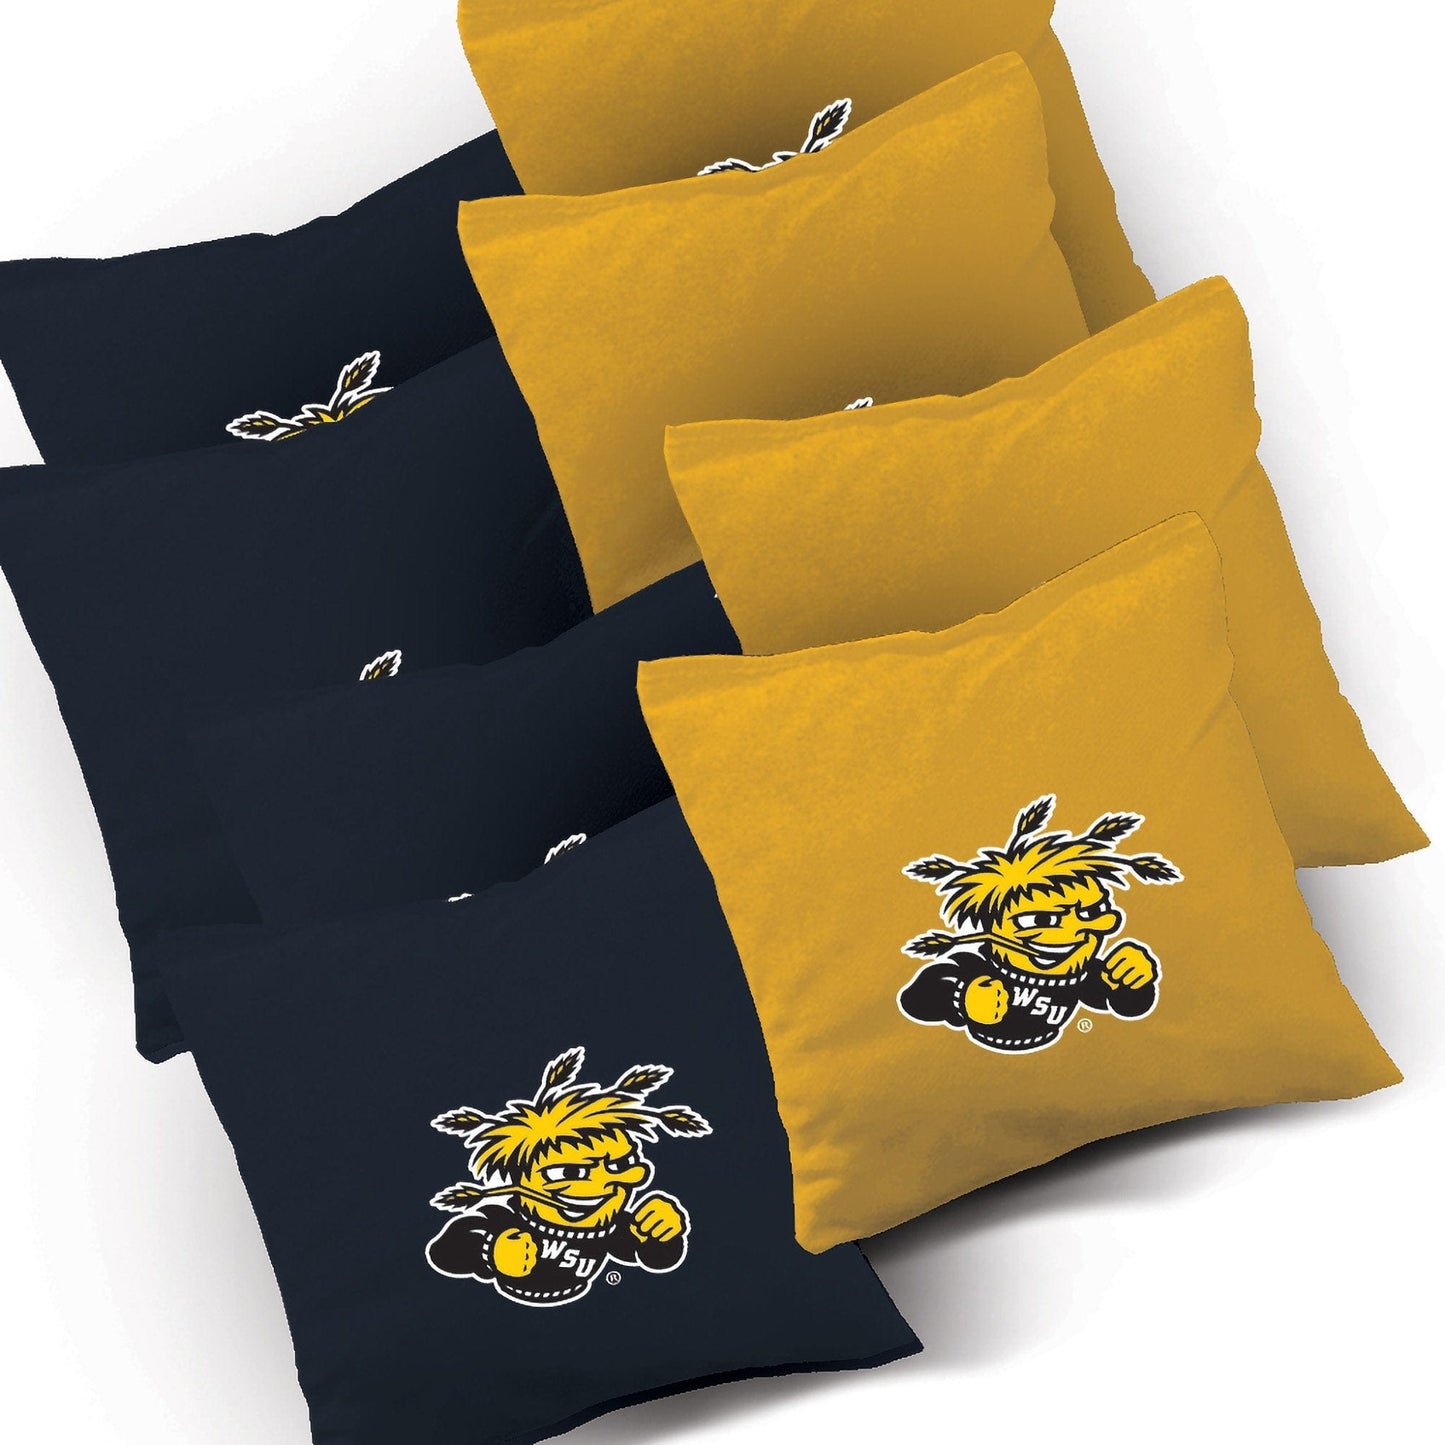 Wichita State Stained Striped team logo bags